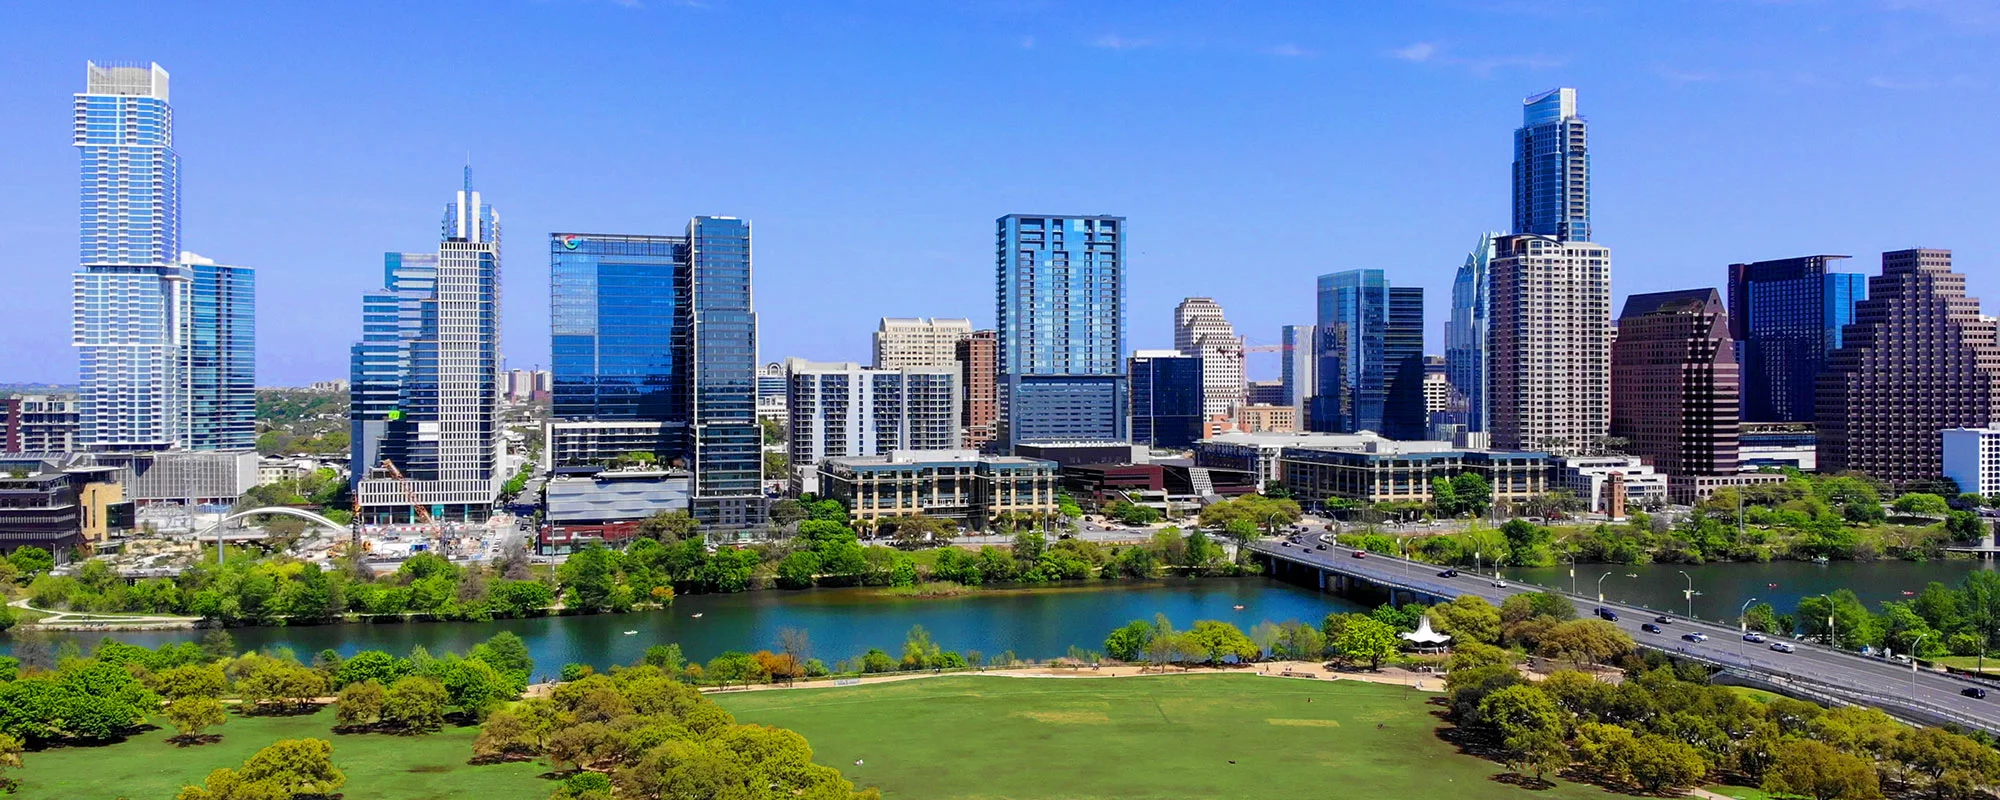 downtown austin texas skyline showing commercial buildings